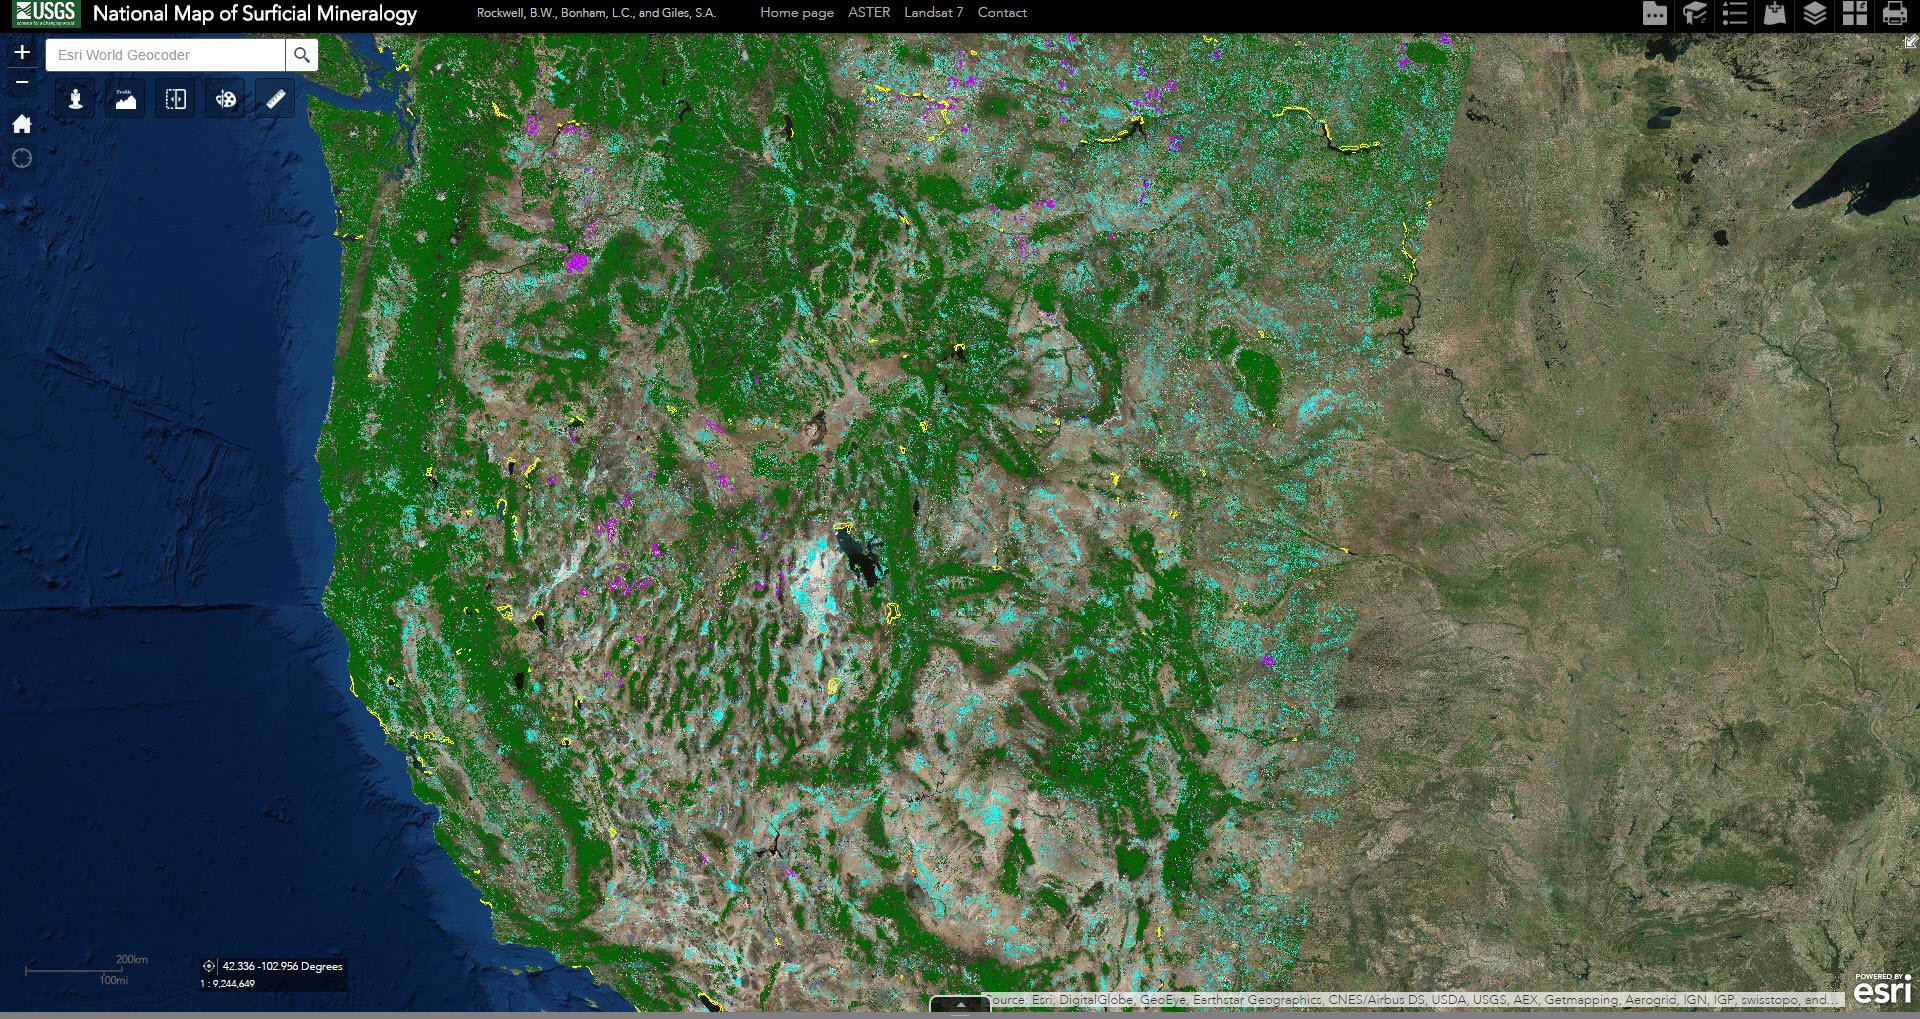 Screen shot of ASTER data over Western United States from the National Map of Surficial Mineralogy.